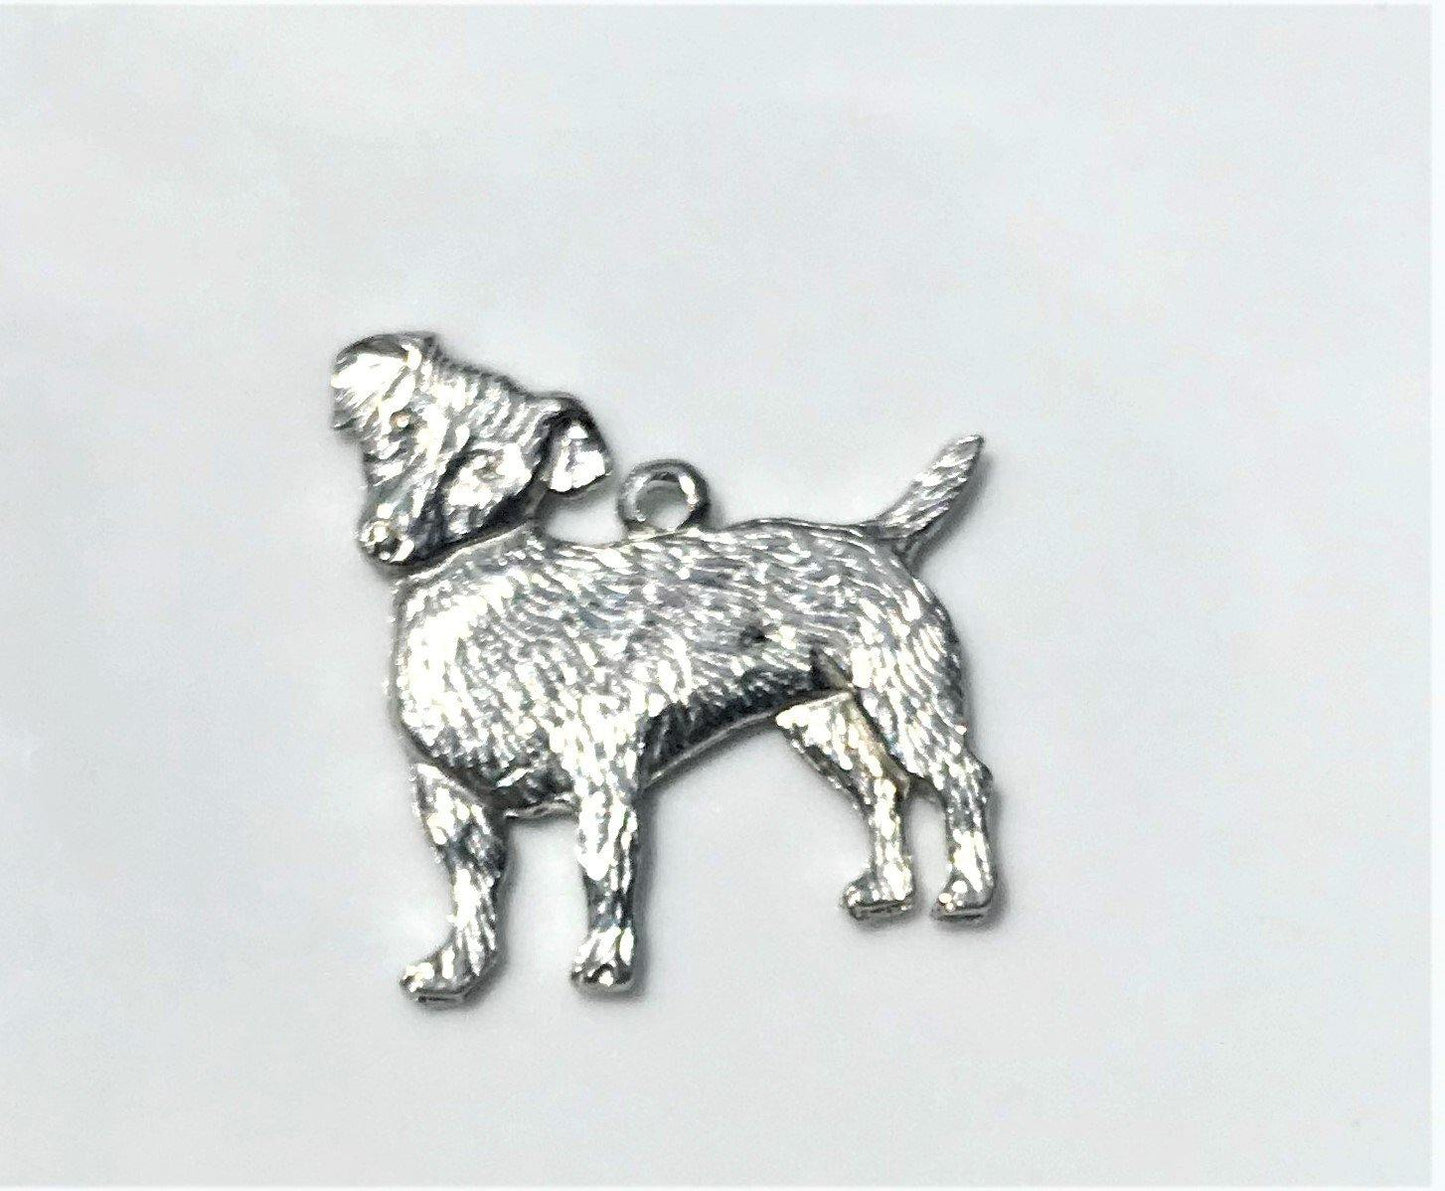 Handmade Pewter Dog Breed Charm Adjustable Necklace - Pet Memorial Jewelry for Daughter -Several Breeds Available - House of Morgan Pewter